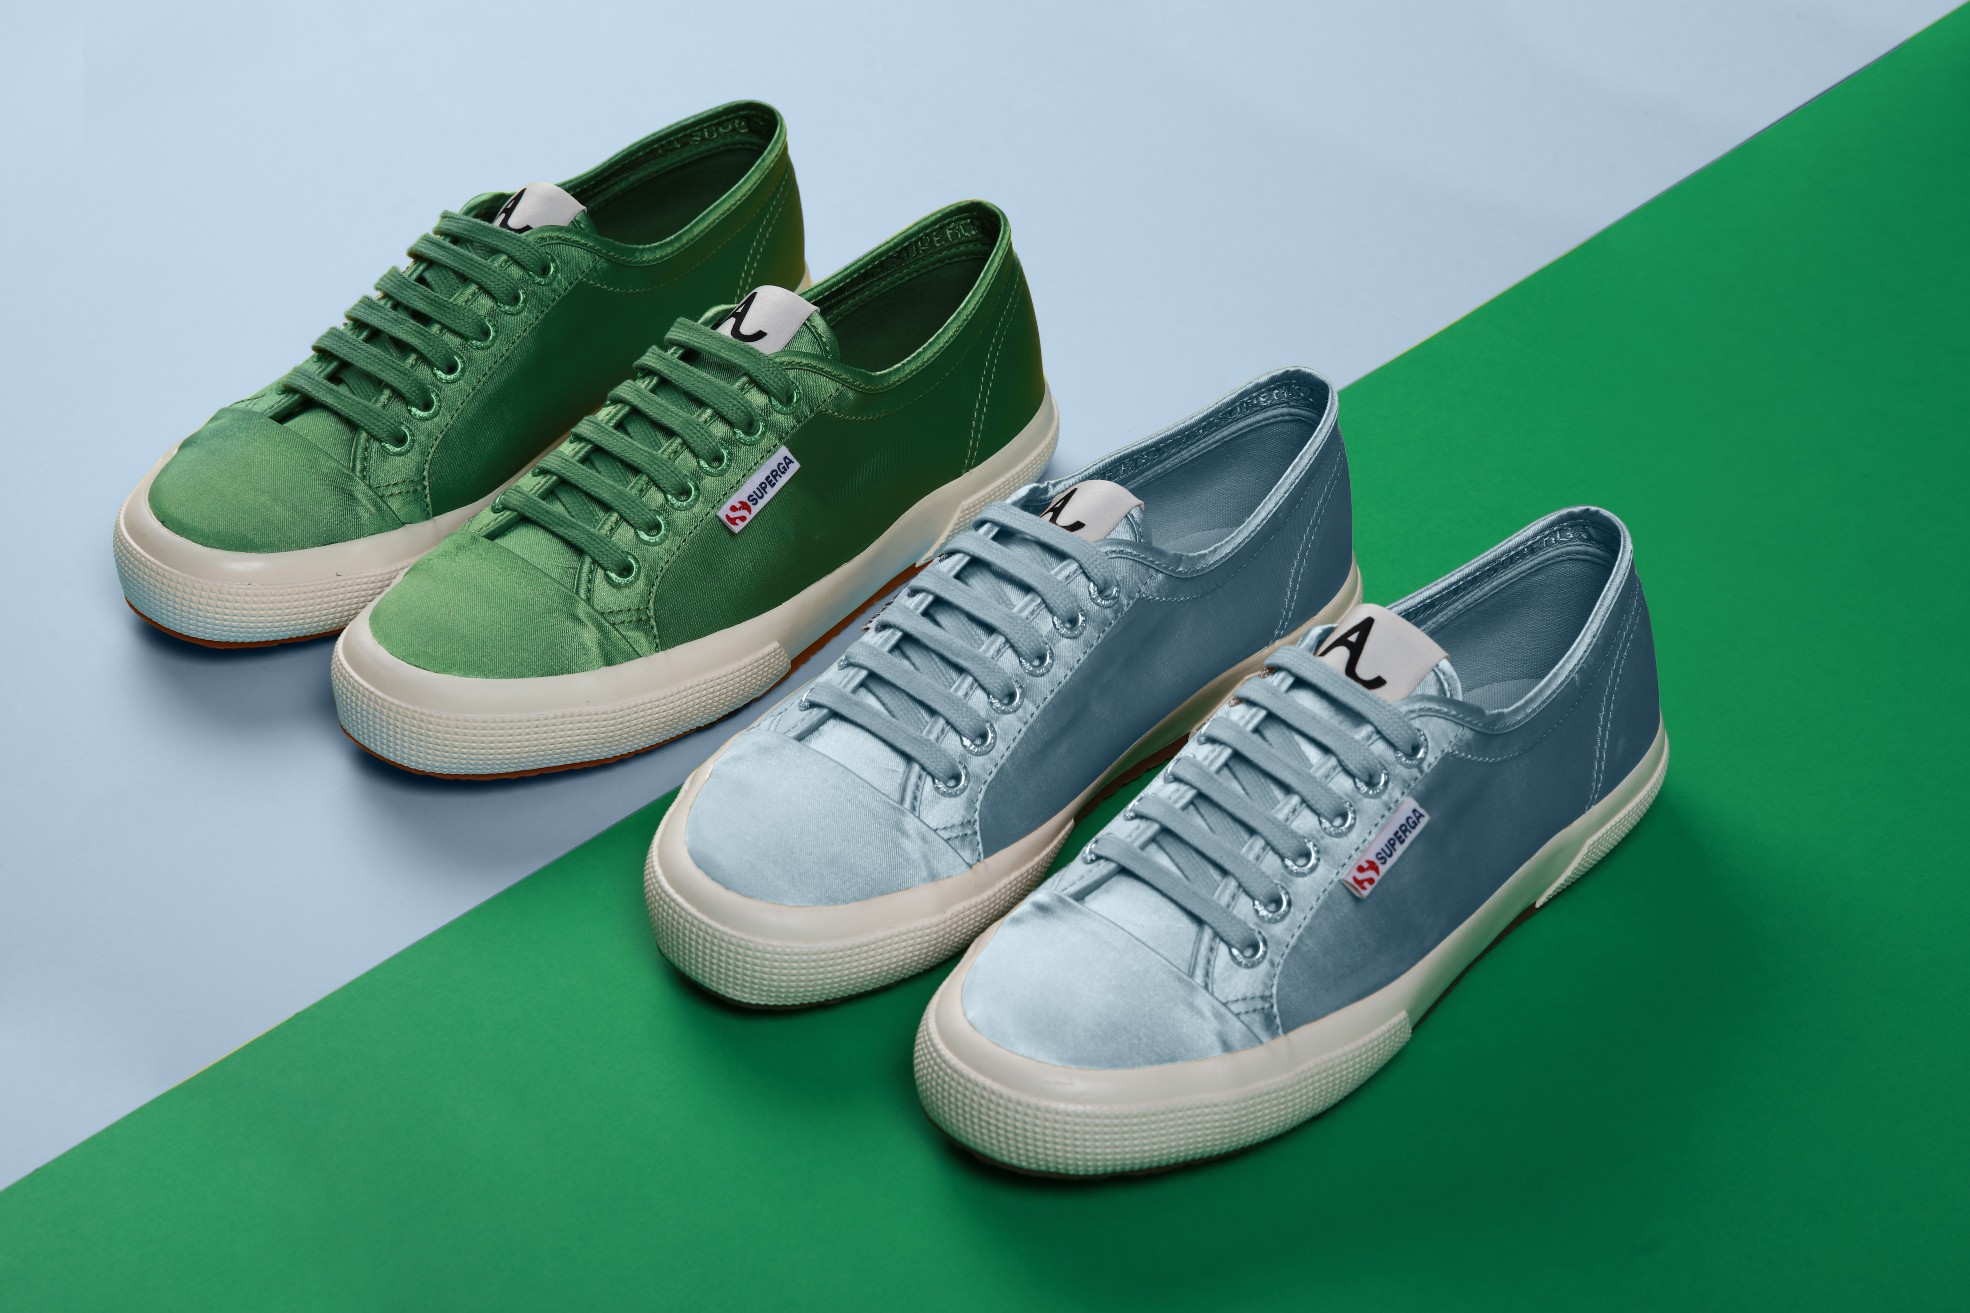 You can get Superga sneakers at up to 70% off in their 4-day flash sale ...